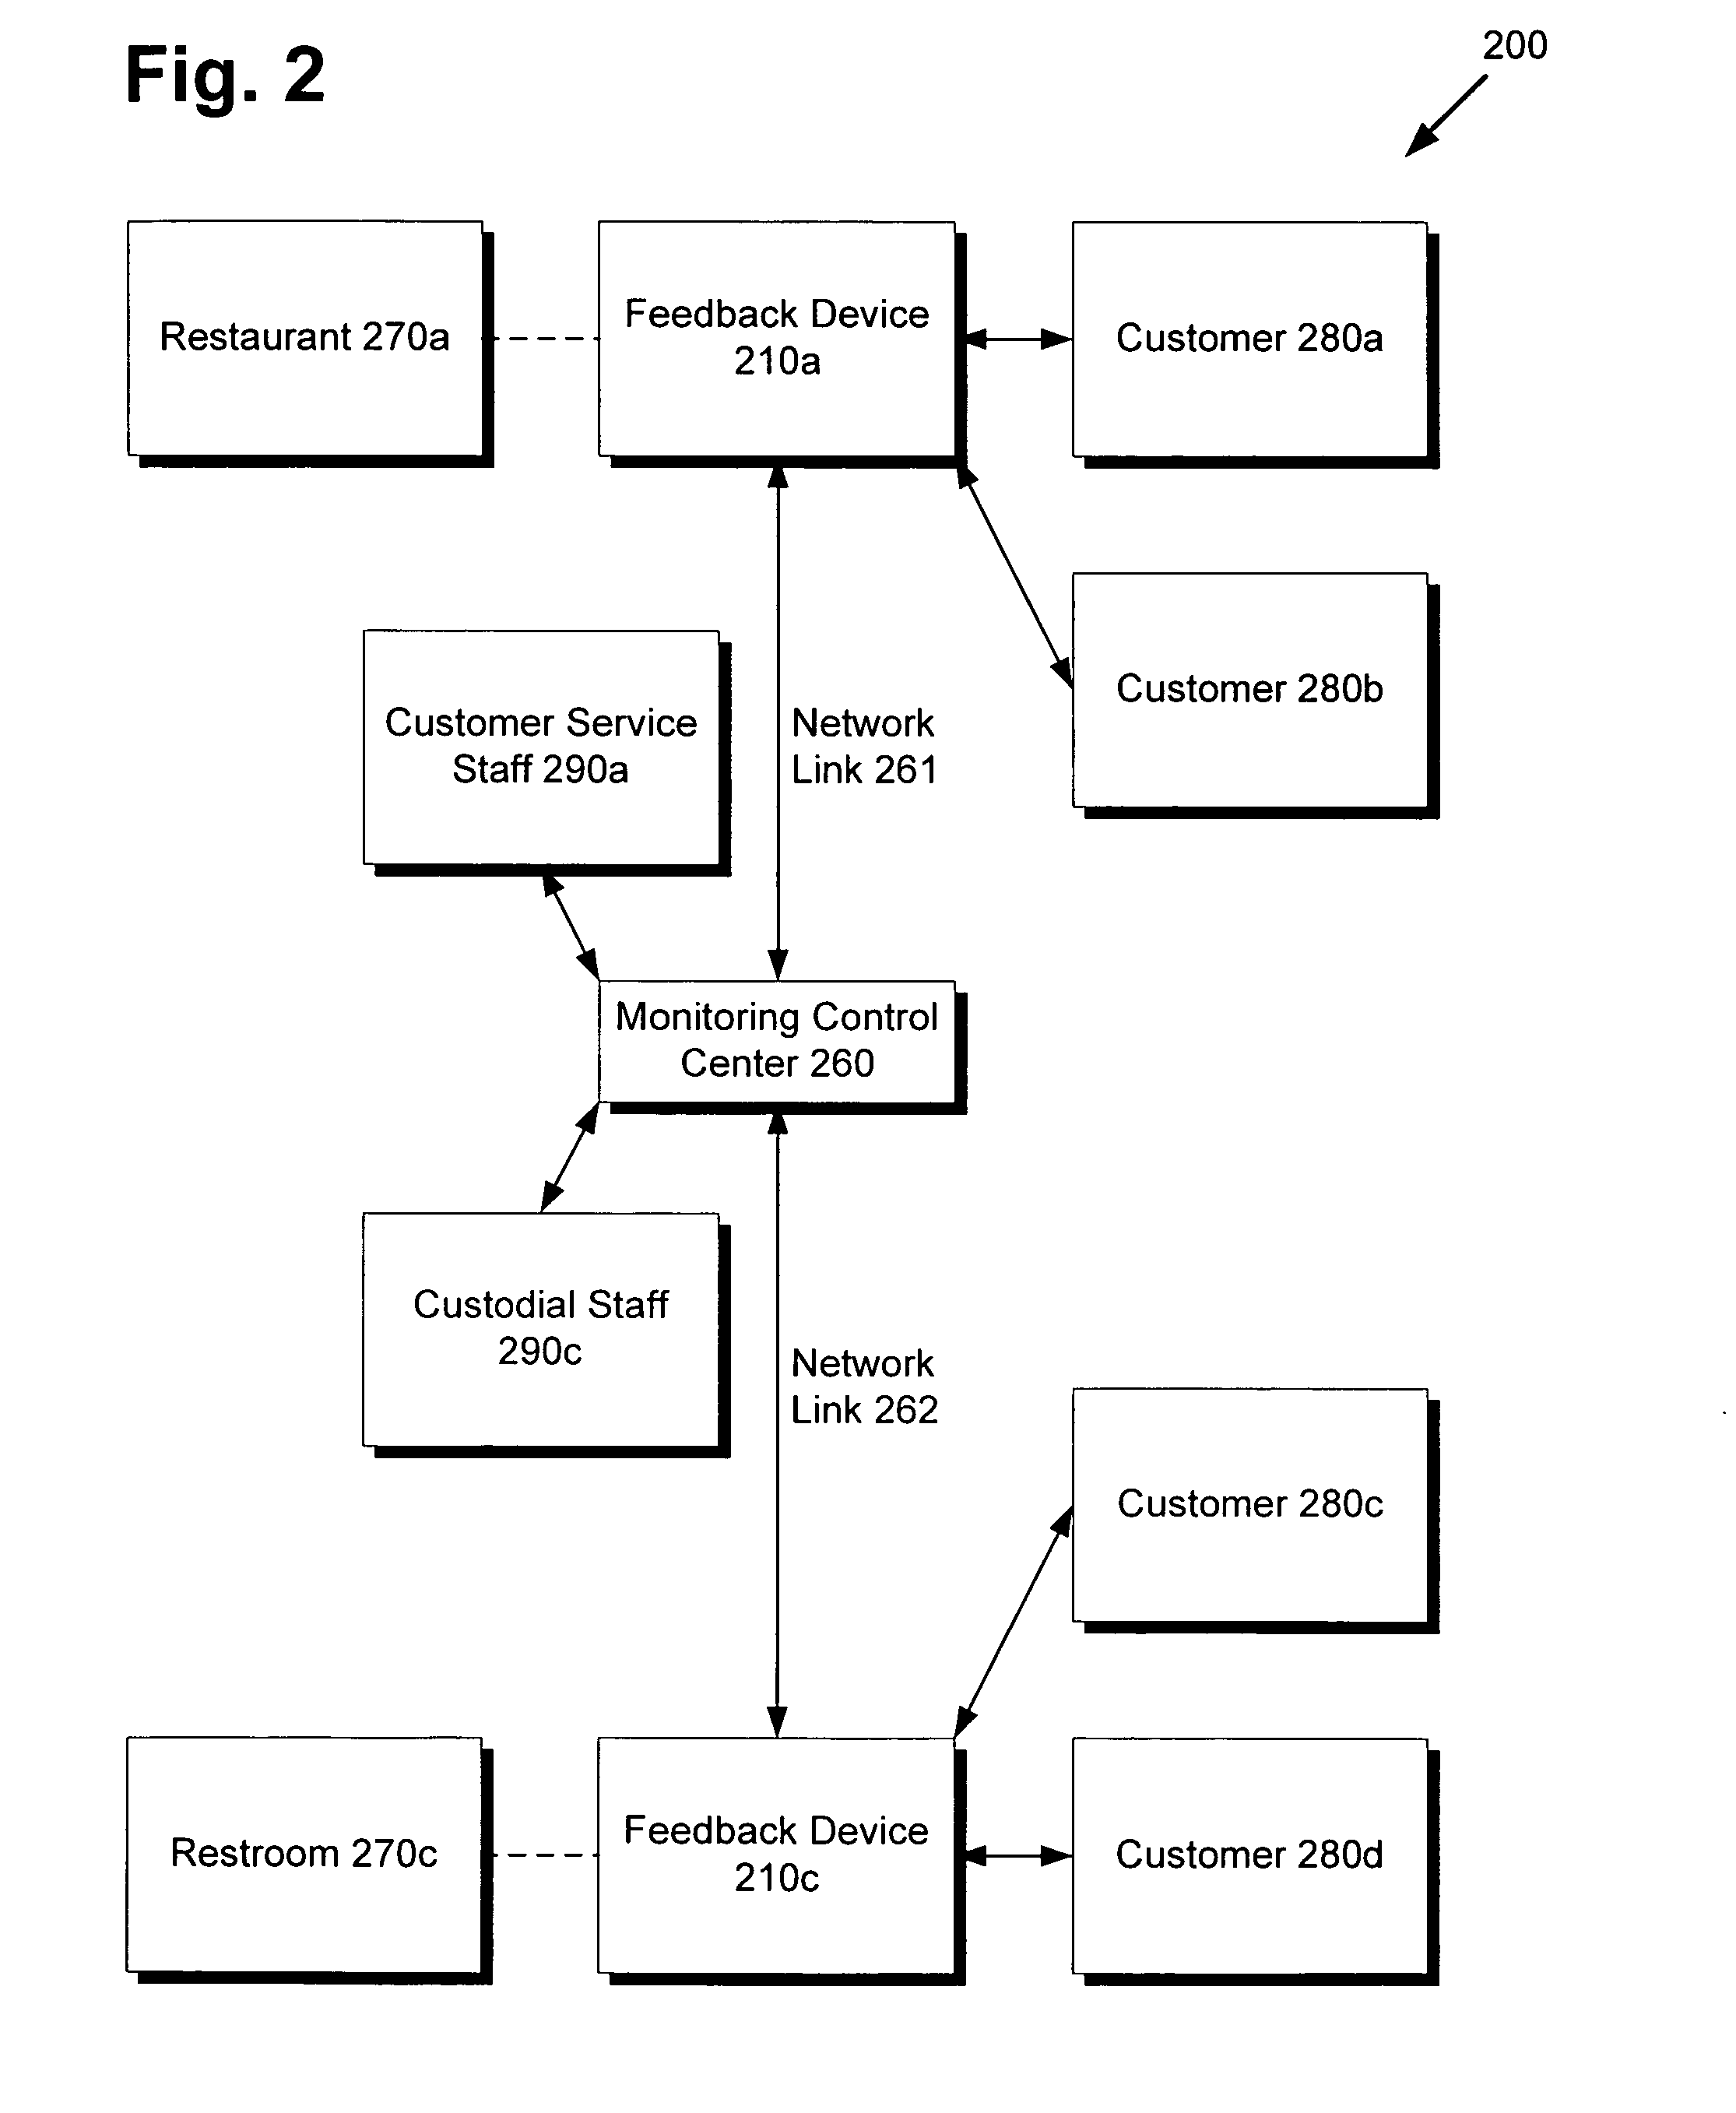 System and method for distributed and real-time collection of customer satisfaction feedback